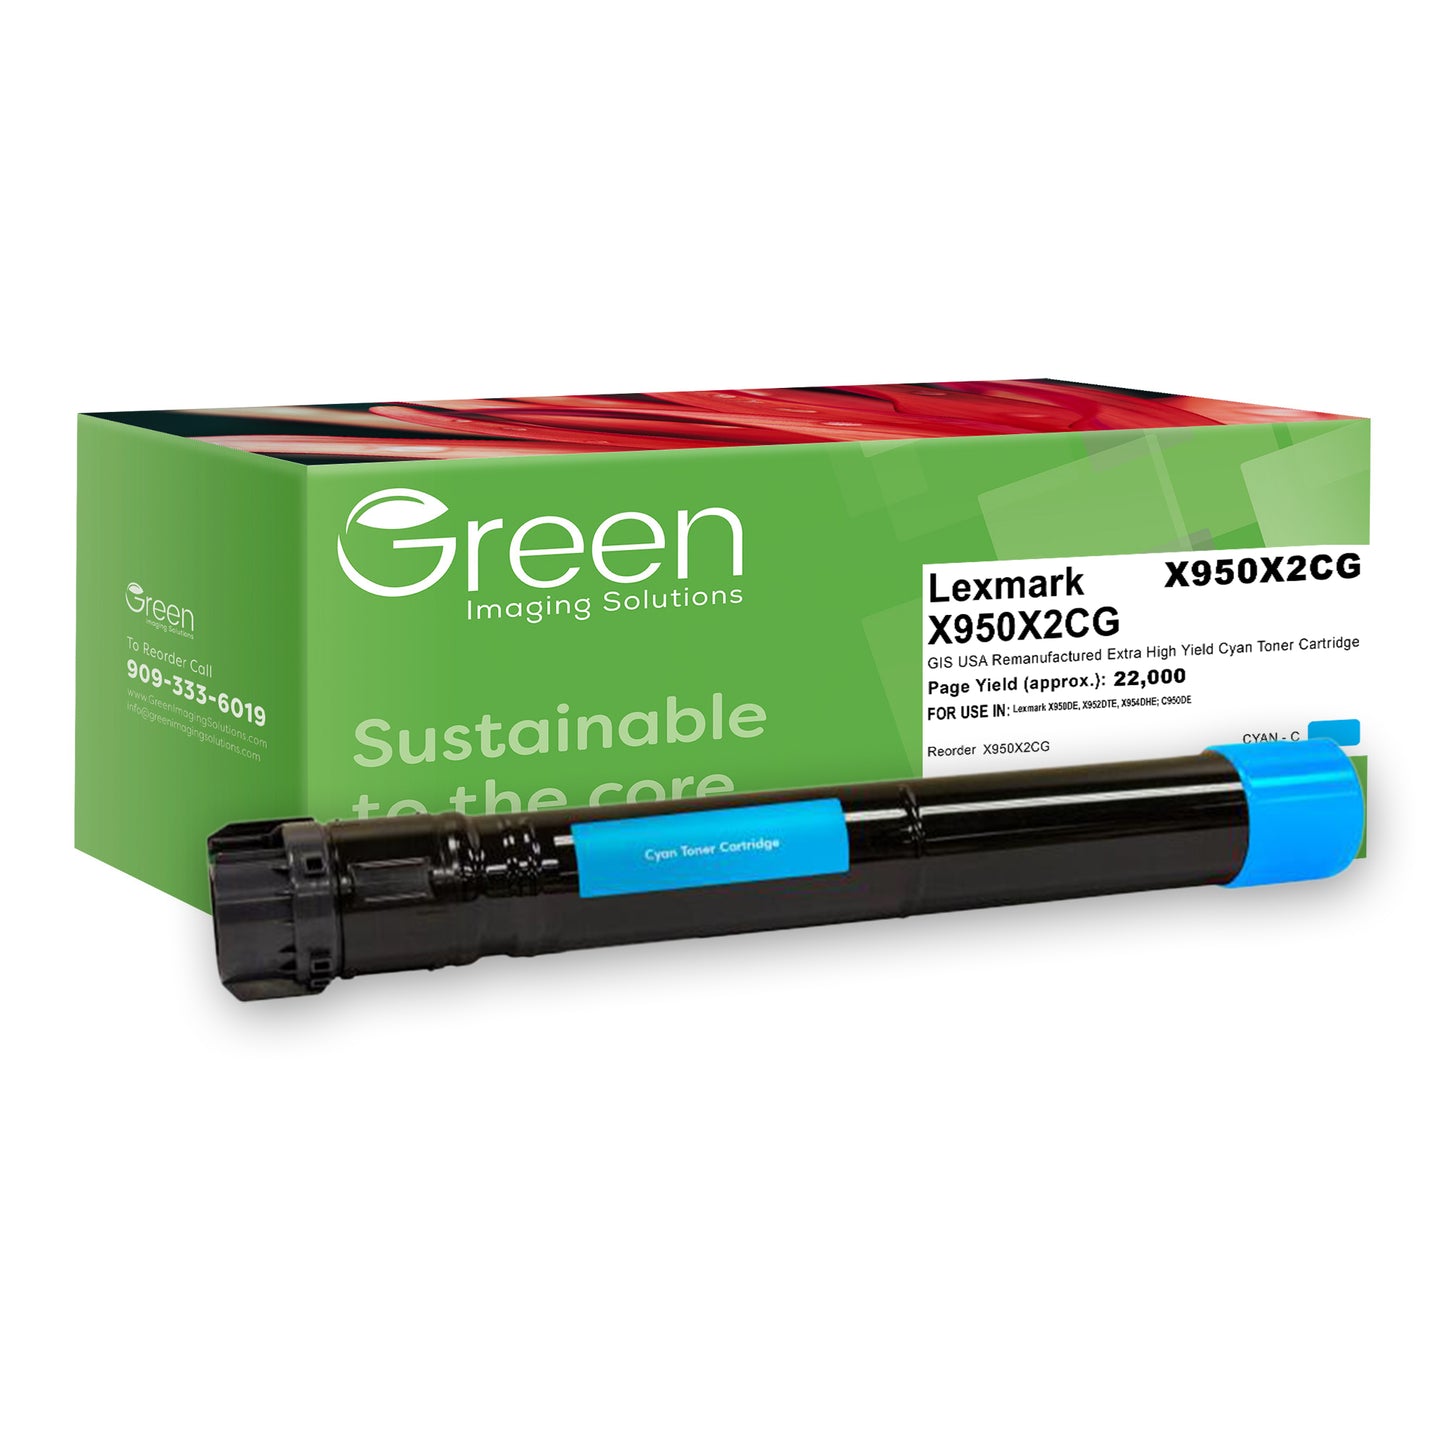 Green Imaging Solutions USA Remanufactured Extra High Yield Cyan Toner Cartridge for Lexmark X950